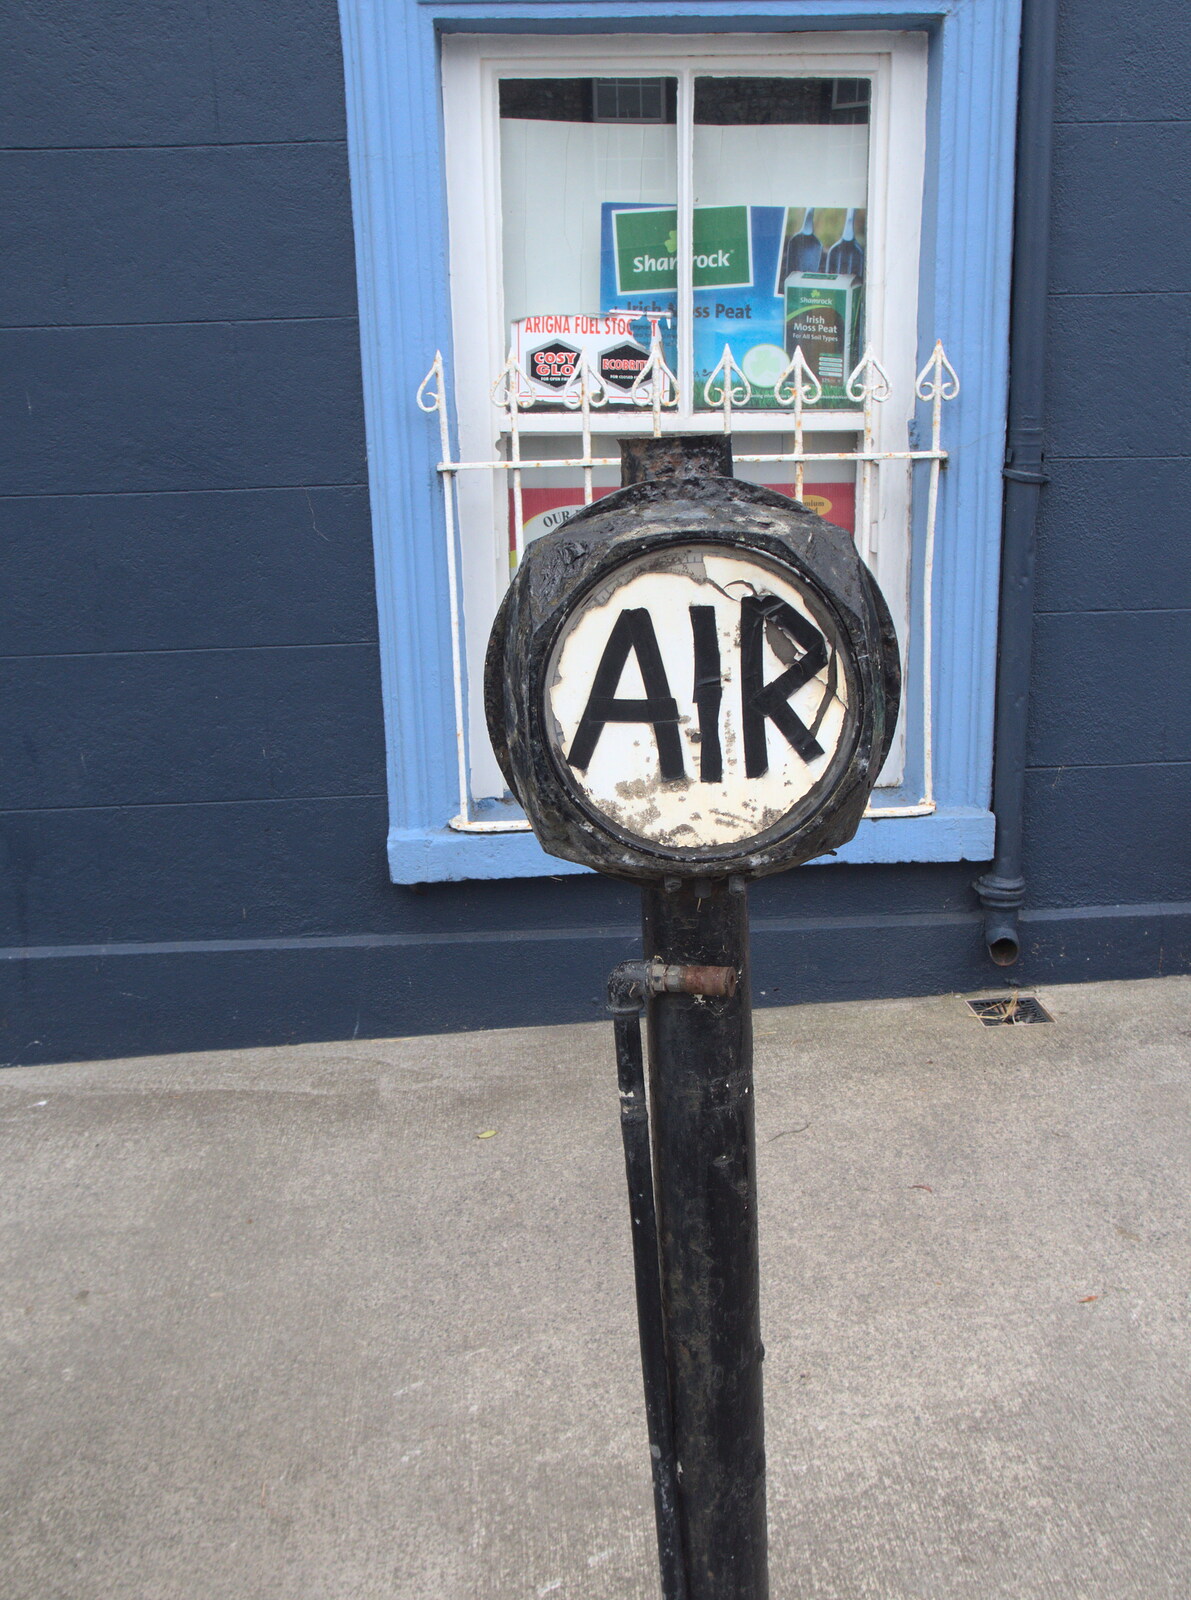 Vintage air line at the Strokestown Texaco from From Achill to Strokestown, Mayo and Roscommon, Ireland - 10th August 2017